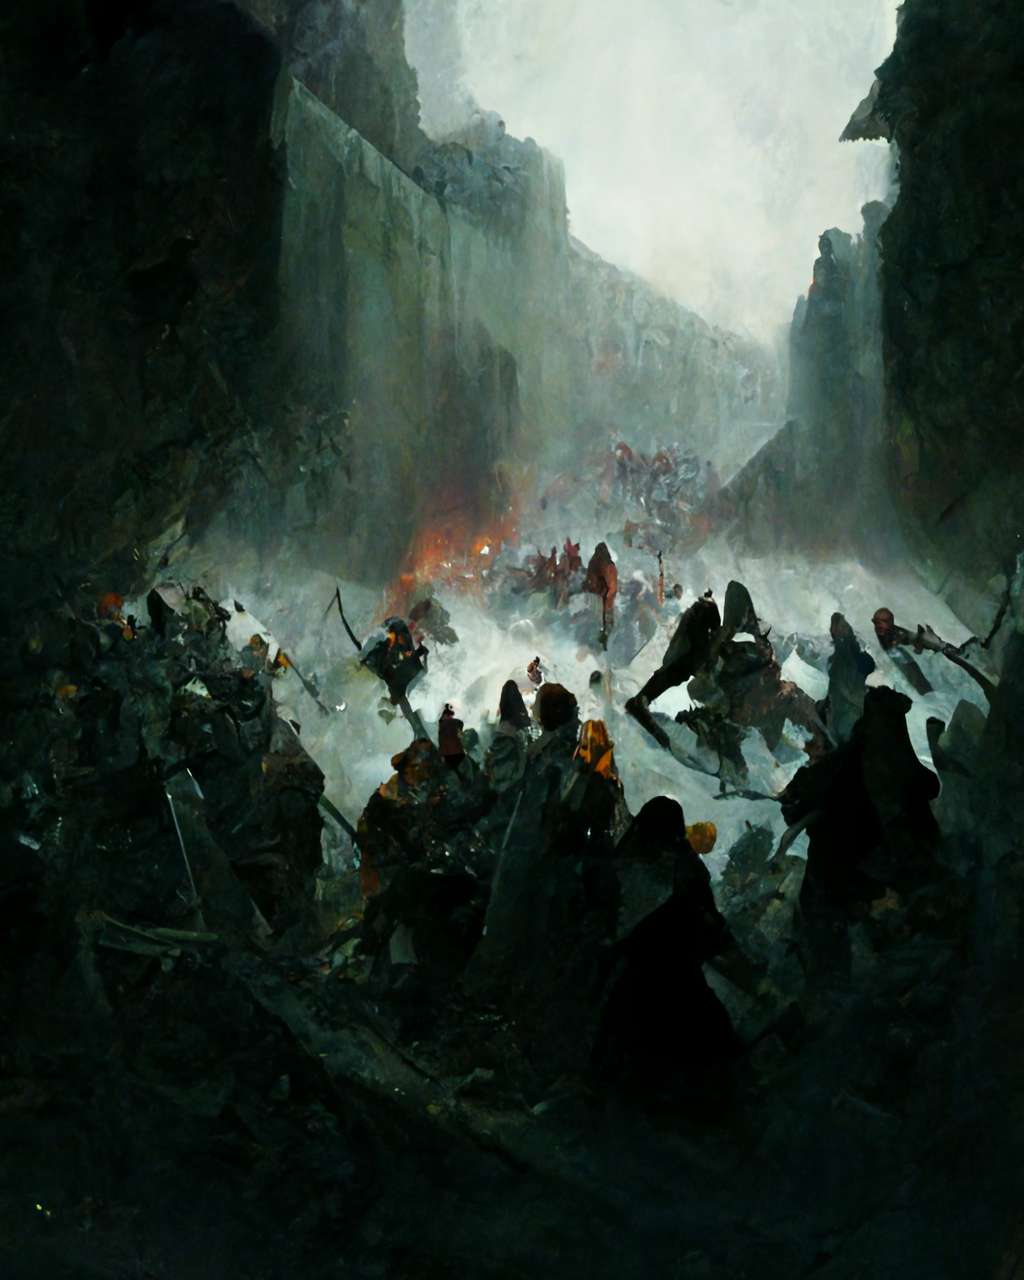 A scene of the Battle